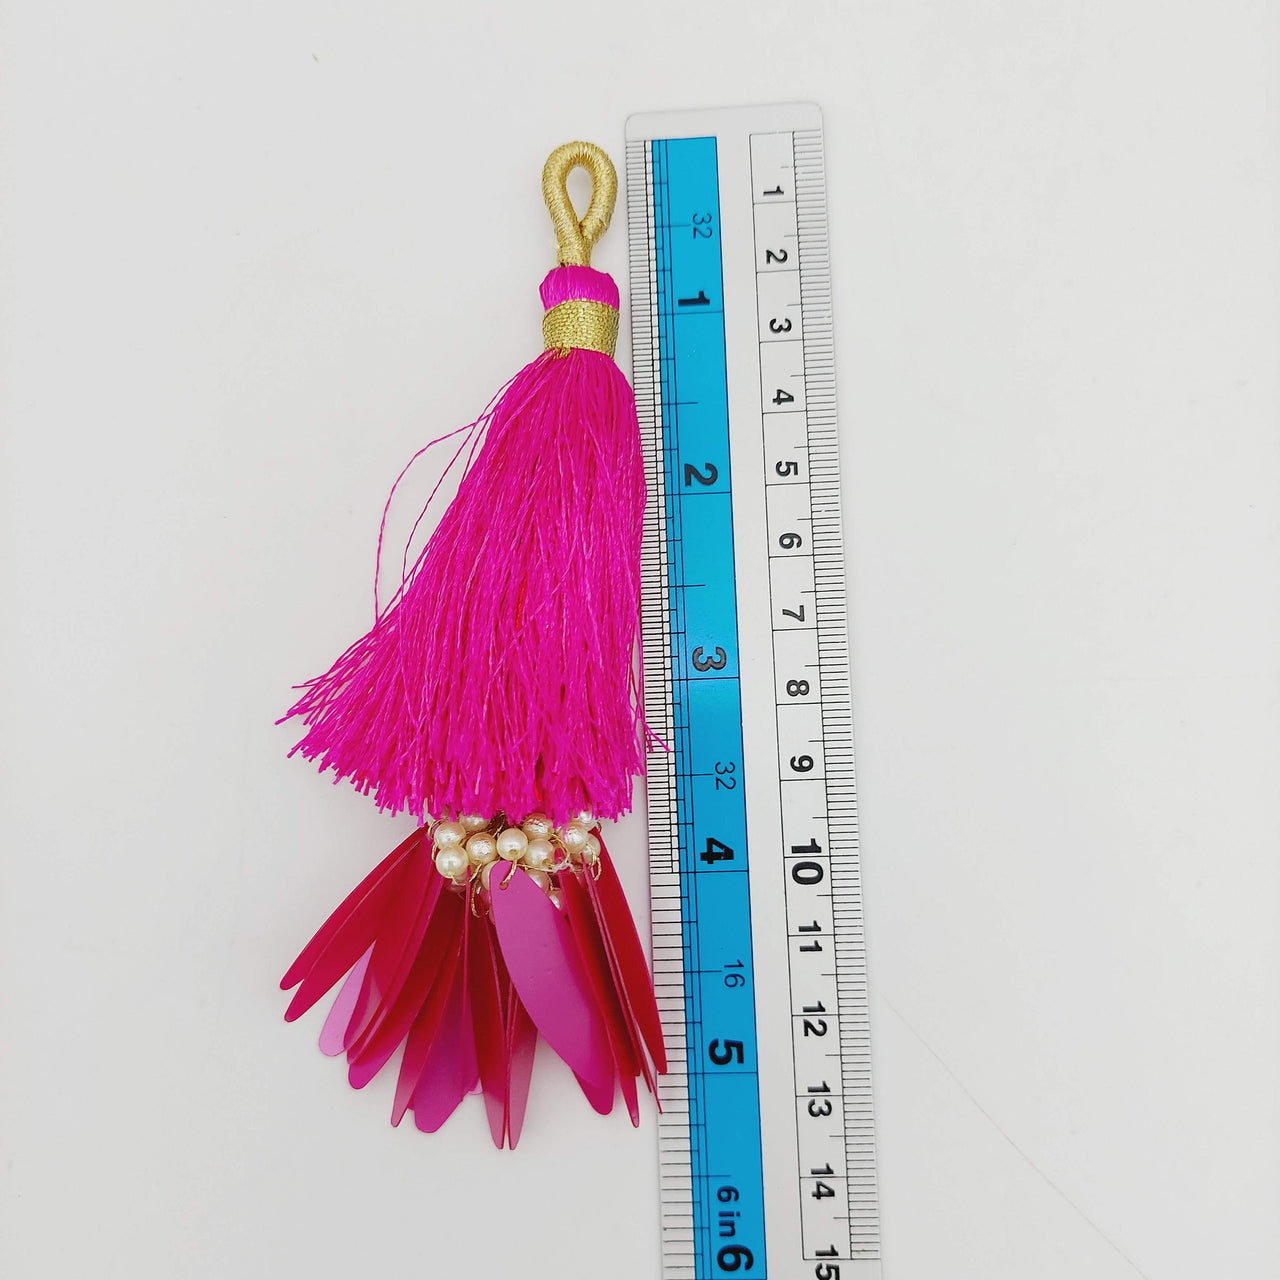 Fuchsia Pink Tassels With Long Sequins And Seed Pearl Beads, Beaded Thread Tassel Charms, 2 Pcs